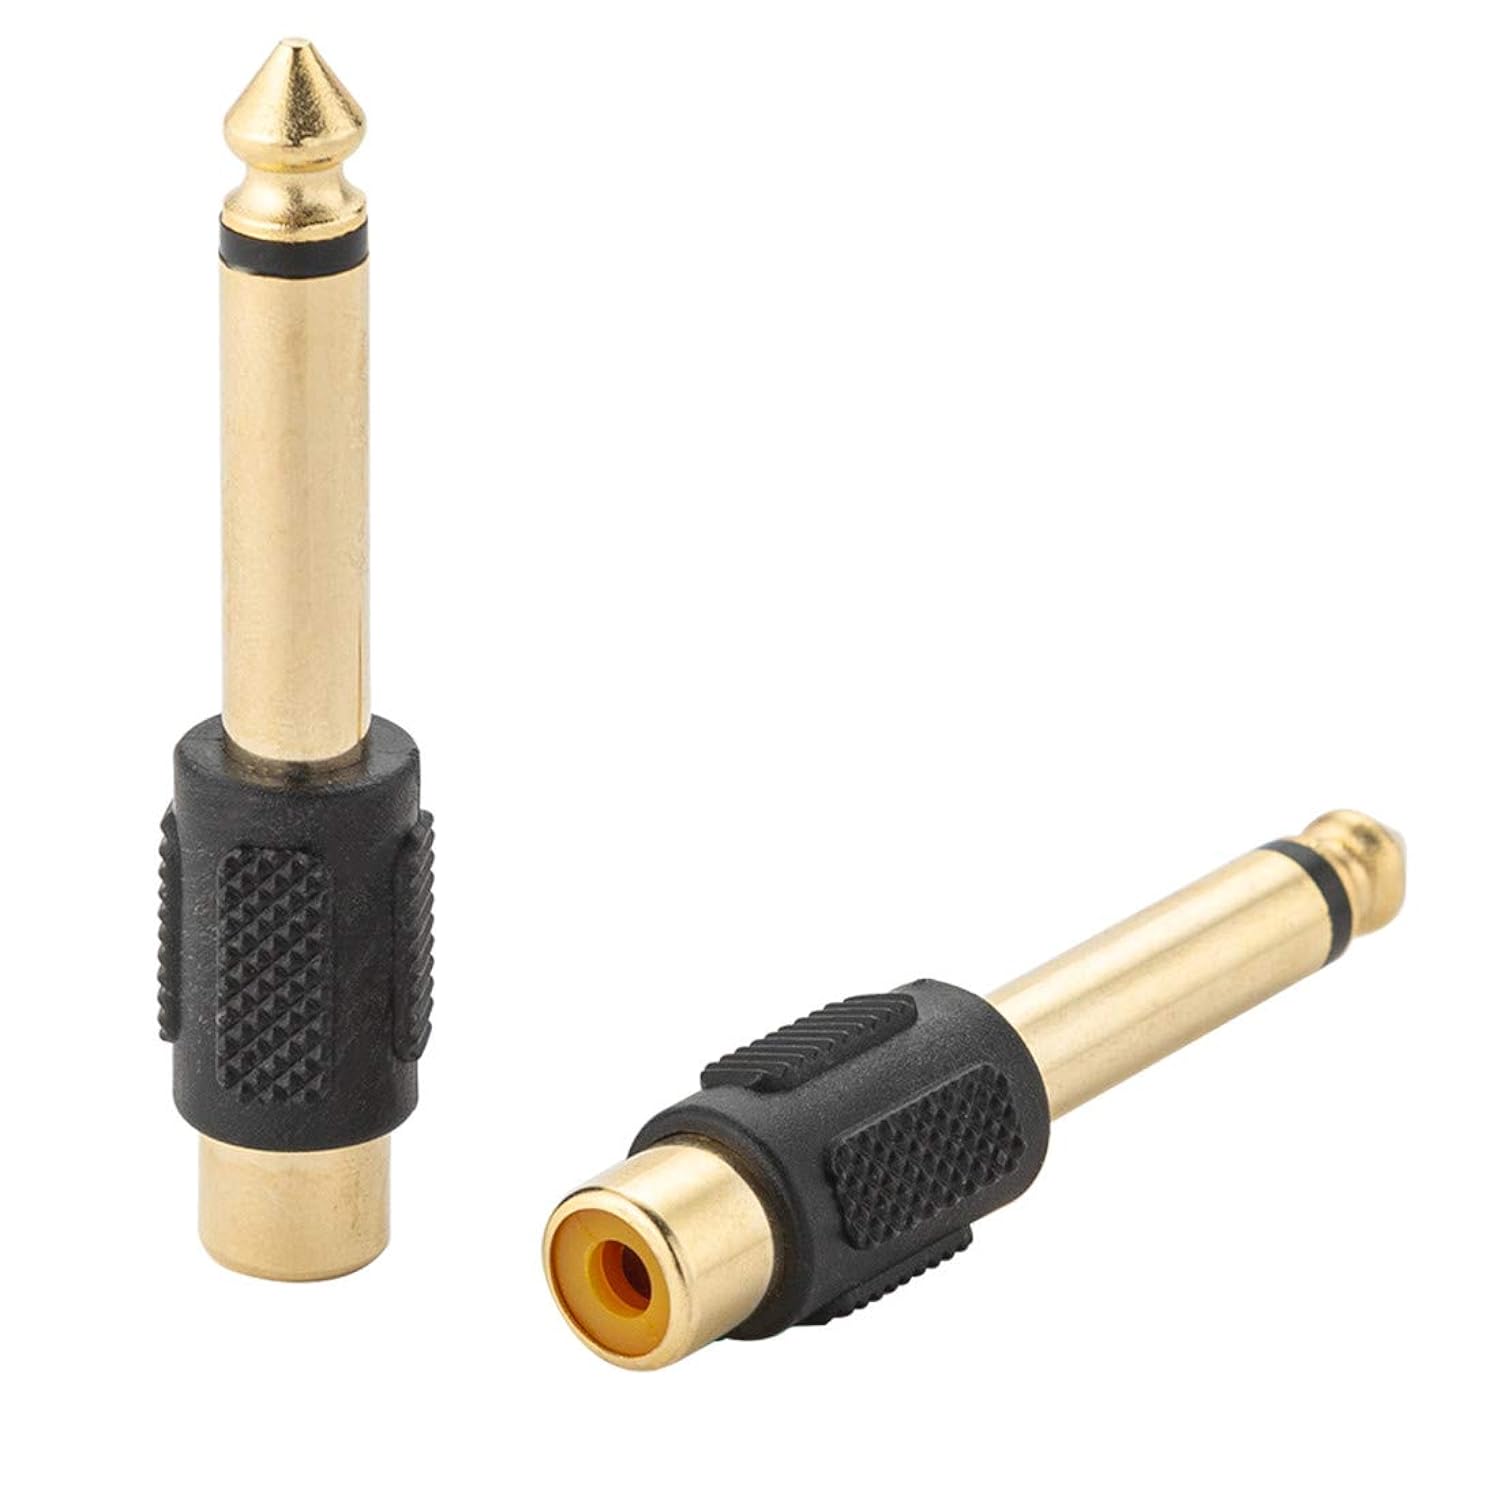 thinkstar Rca To 1/4 Adapter, Rca Female To Ts 6.35Mm Mono Male Converter Audio Connector Plug Gold Plated For Mixer, Amp, Subwoofer (1…